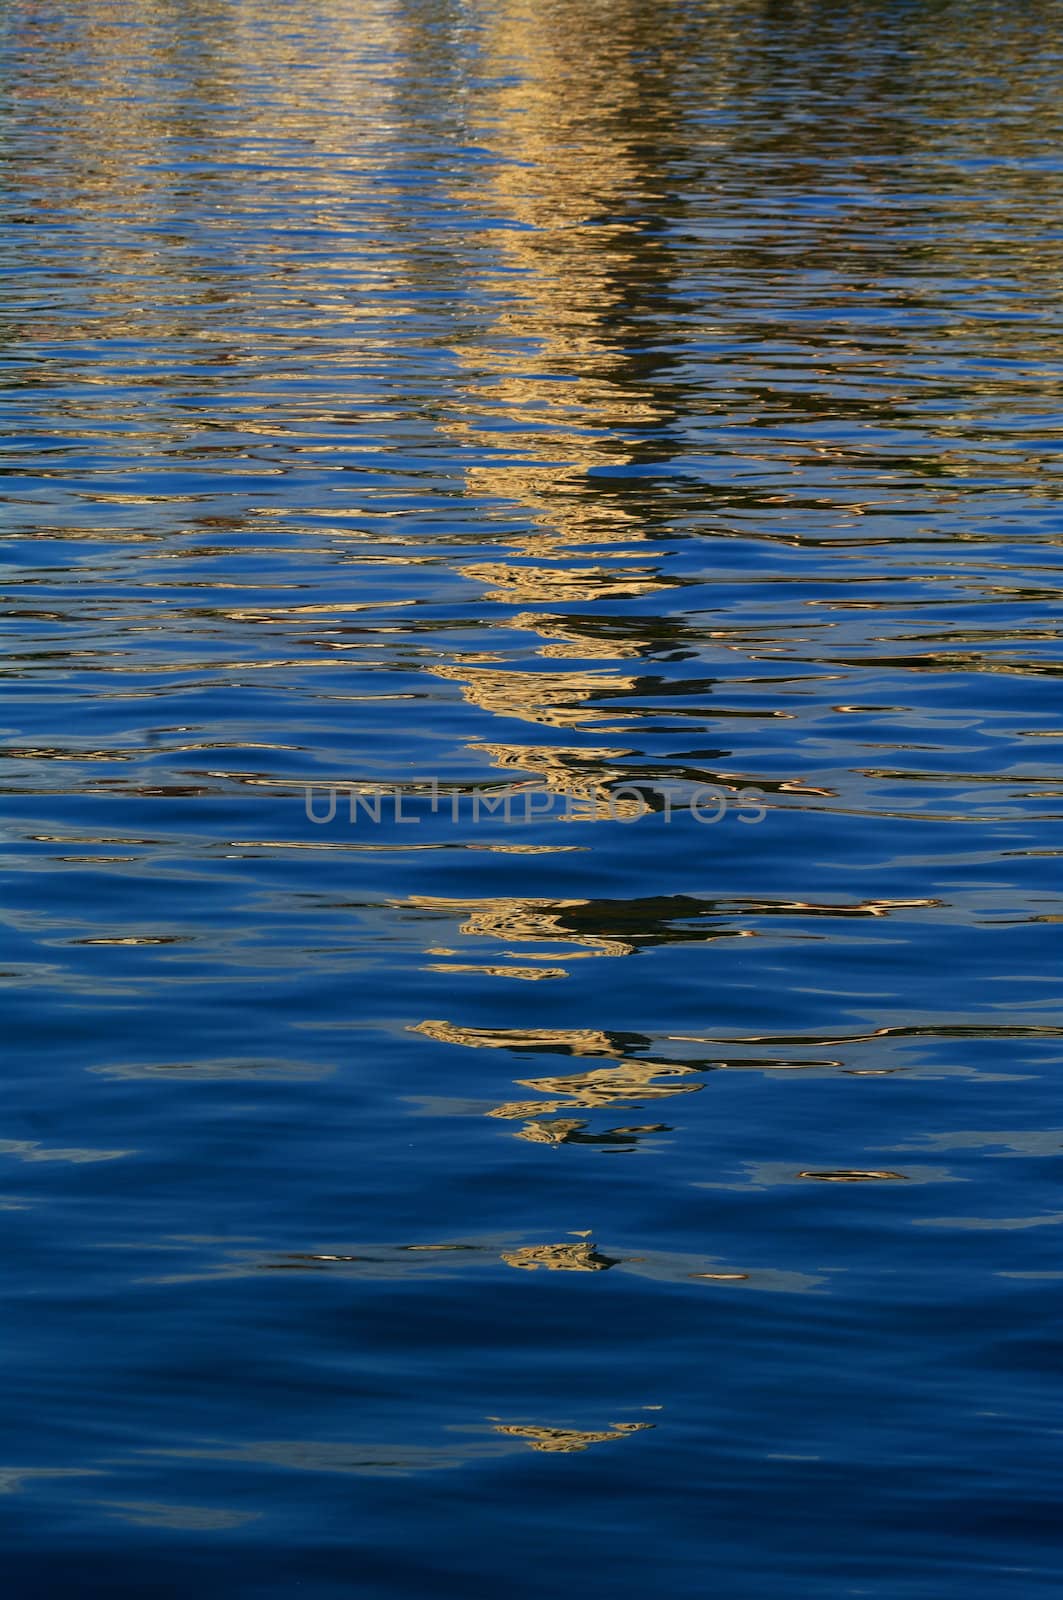 Reflection of church tower in the sea water